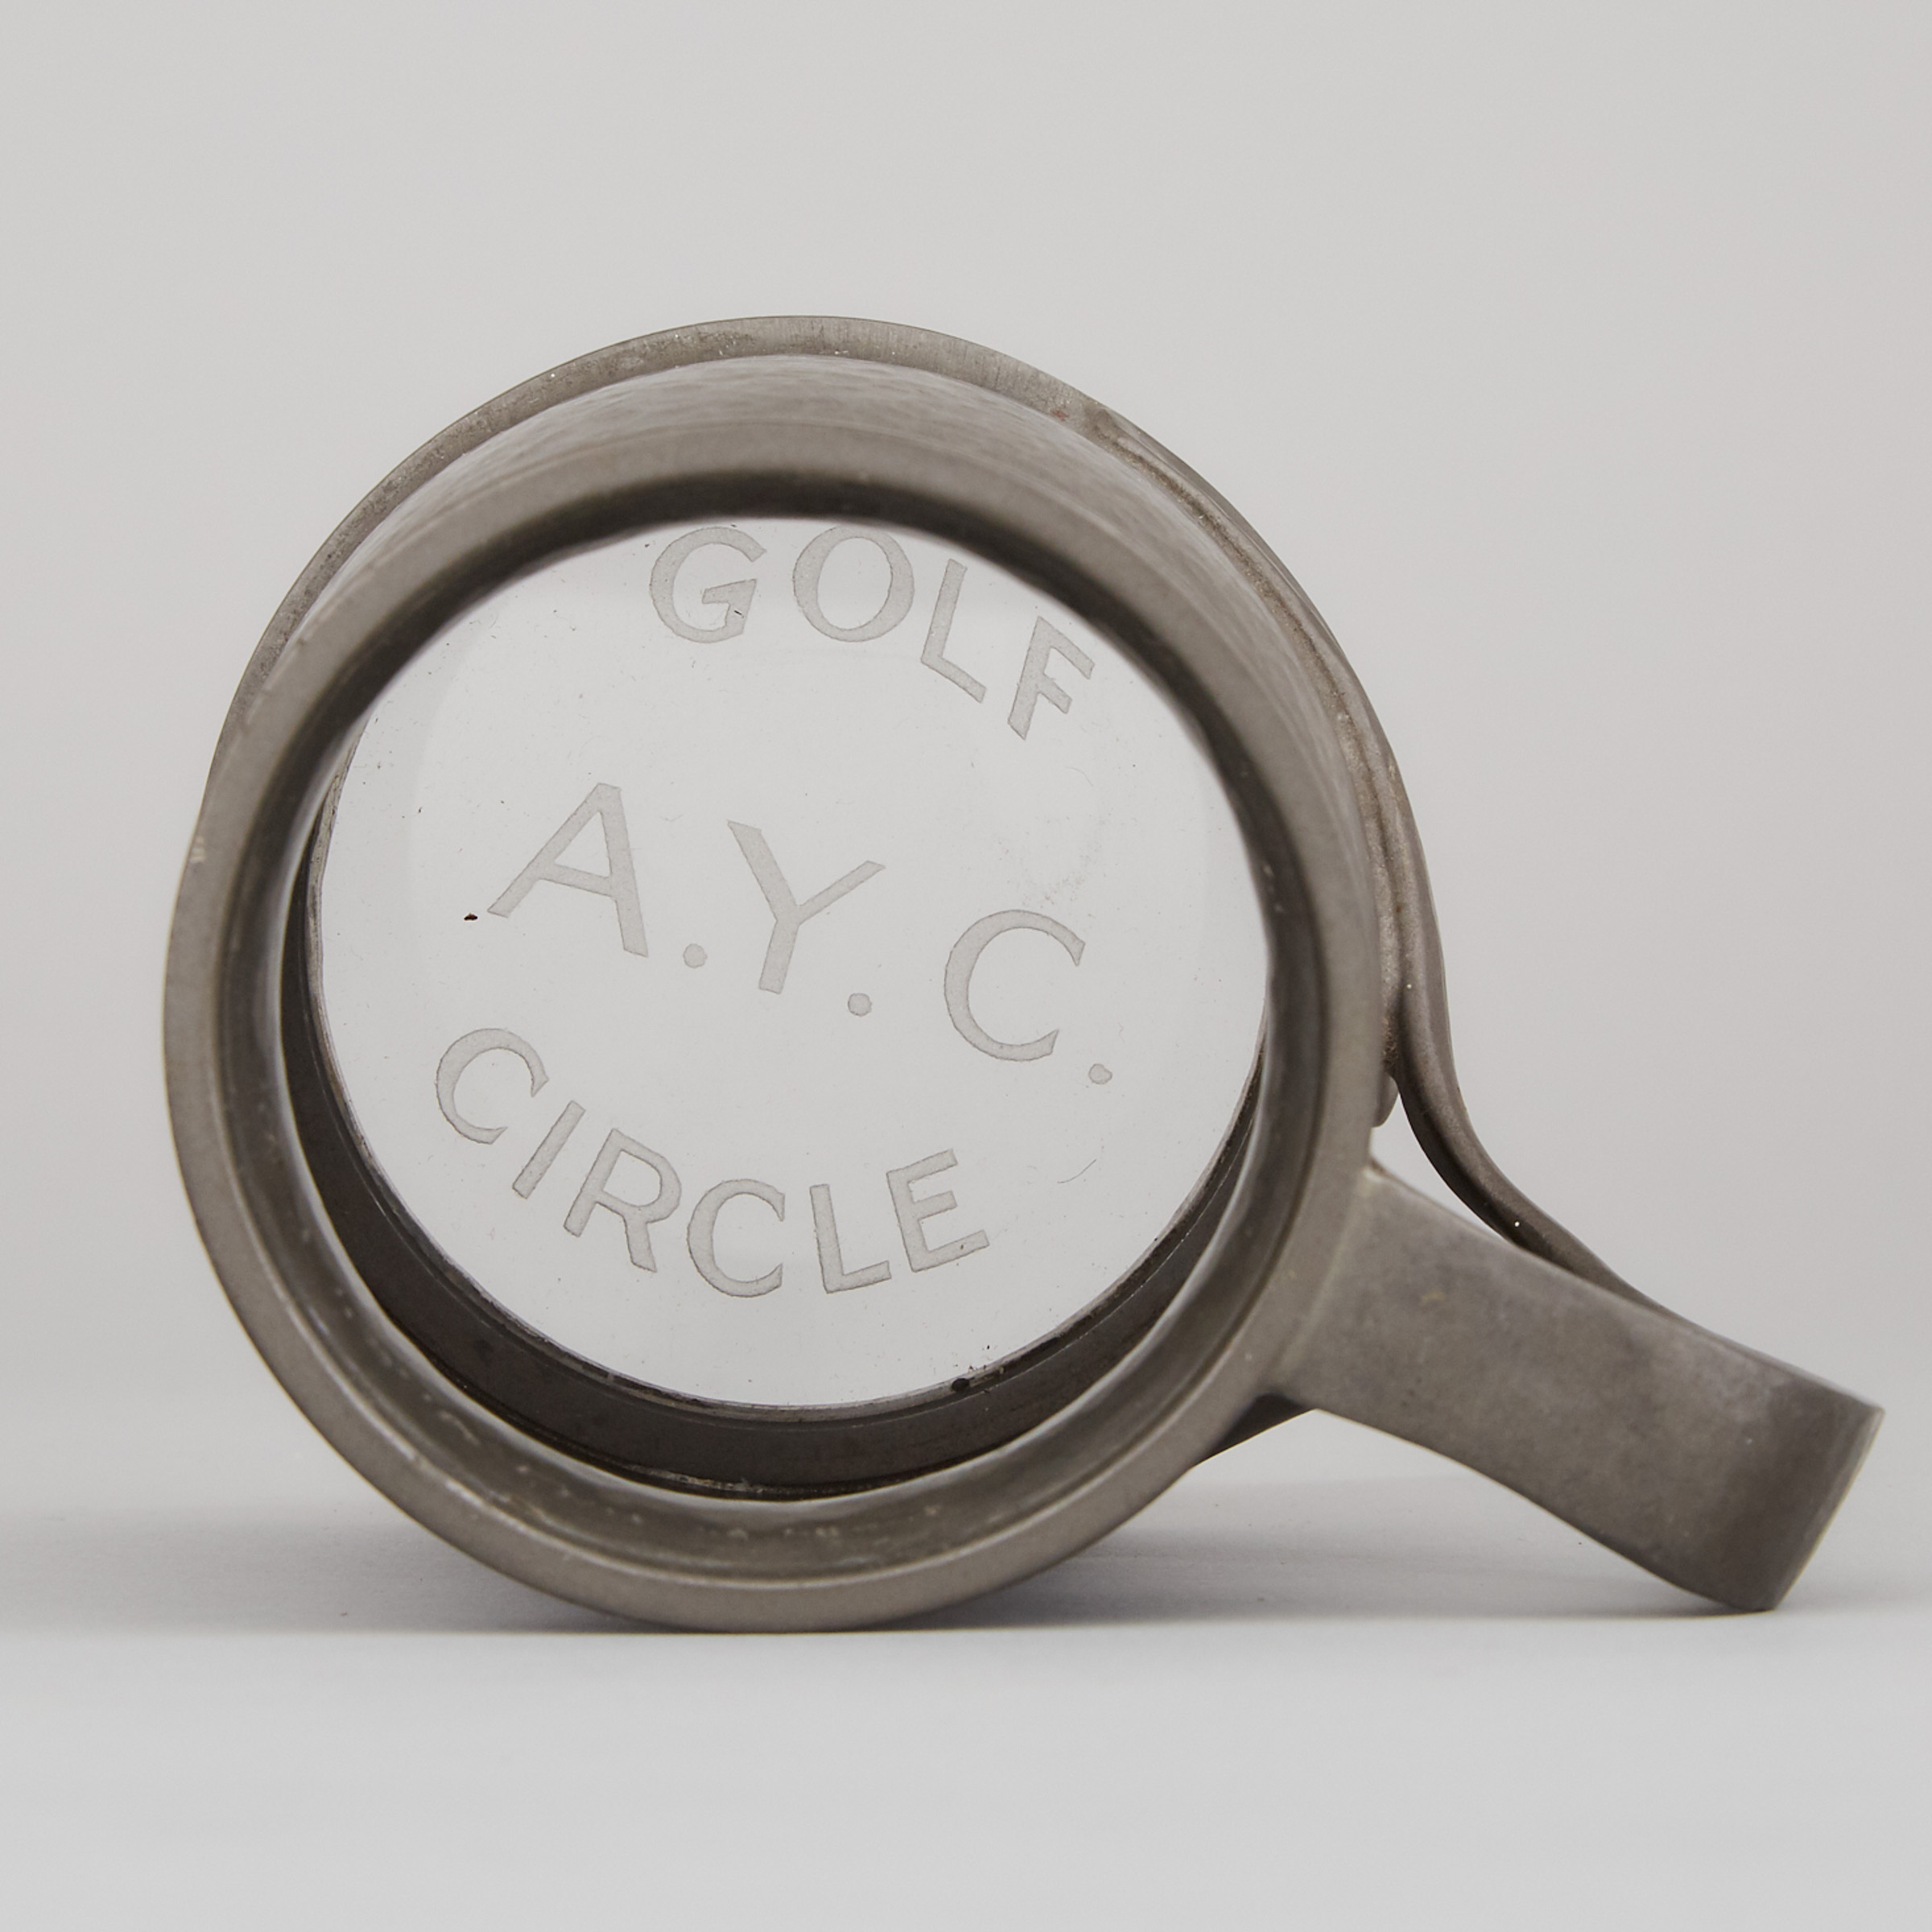 Tudric Pewter Golfer's Mug by Archibald Knox for Liberty & Co., early 20th century